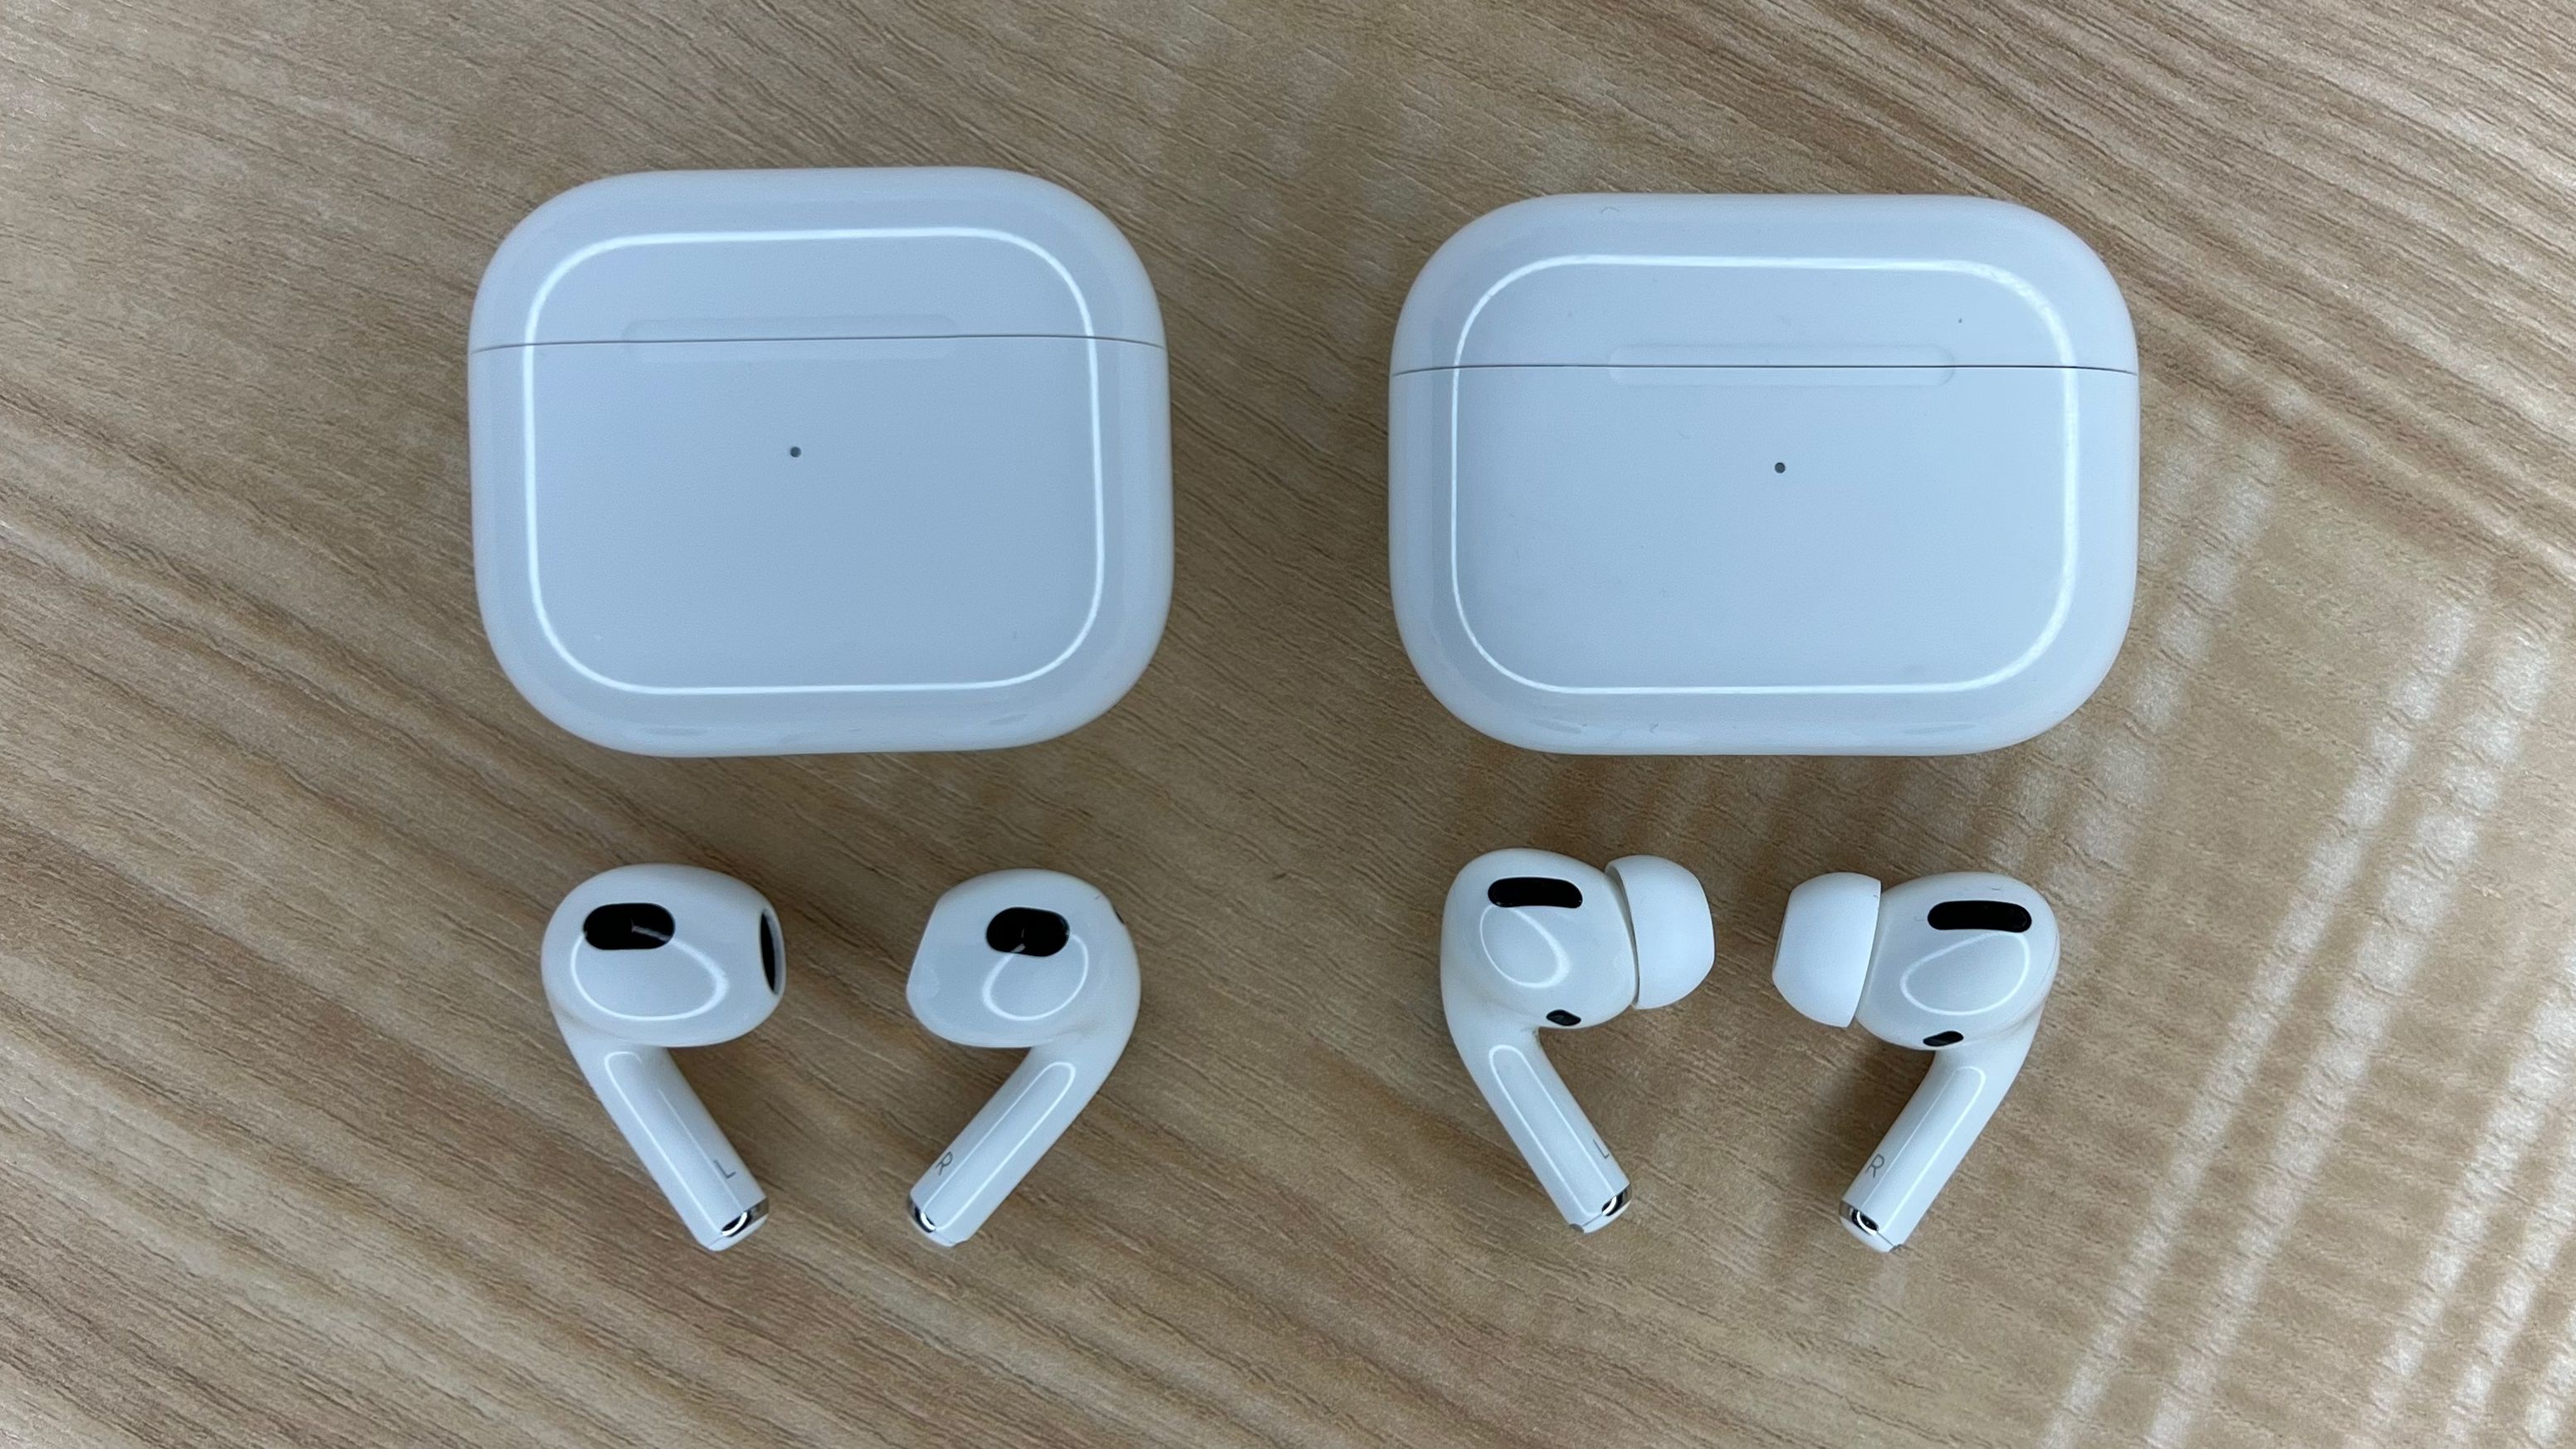 Apple AirPods 3 vs. AirPods Pro: Which wireless earbuds should you buy?